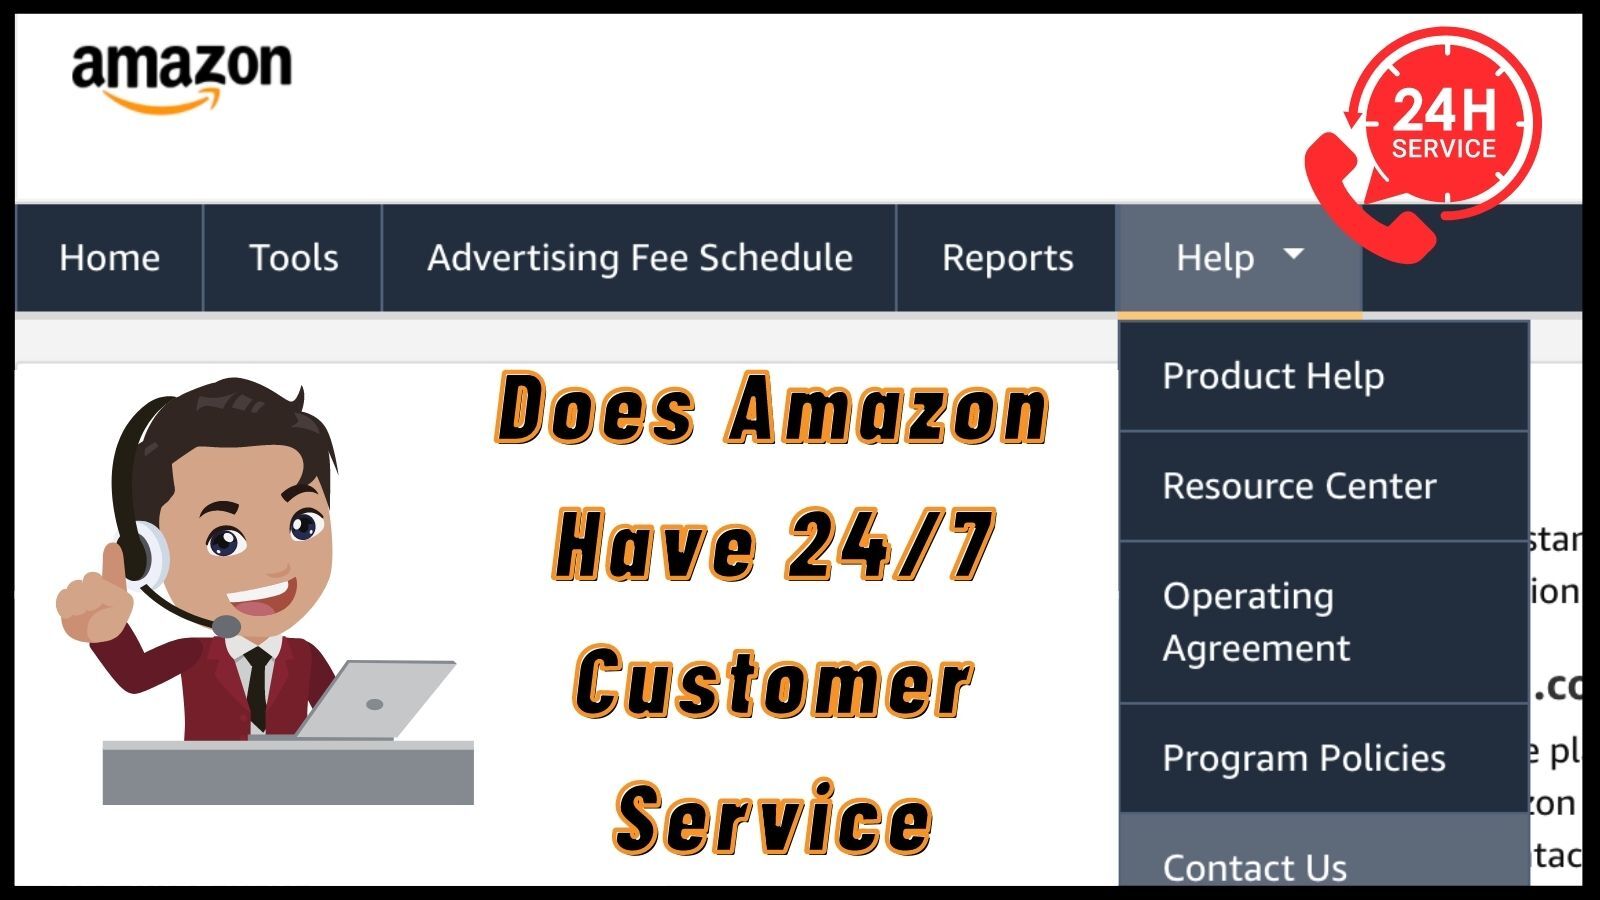 Does Amazon Have 24/7 Customer Service? (Online, On Phone, Email + More)